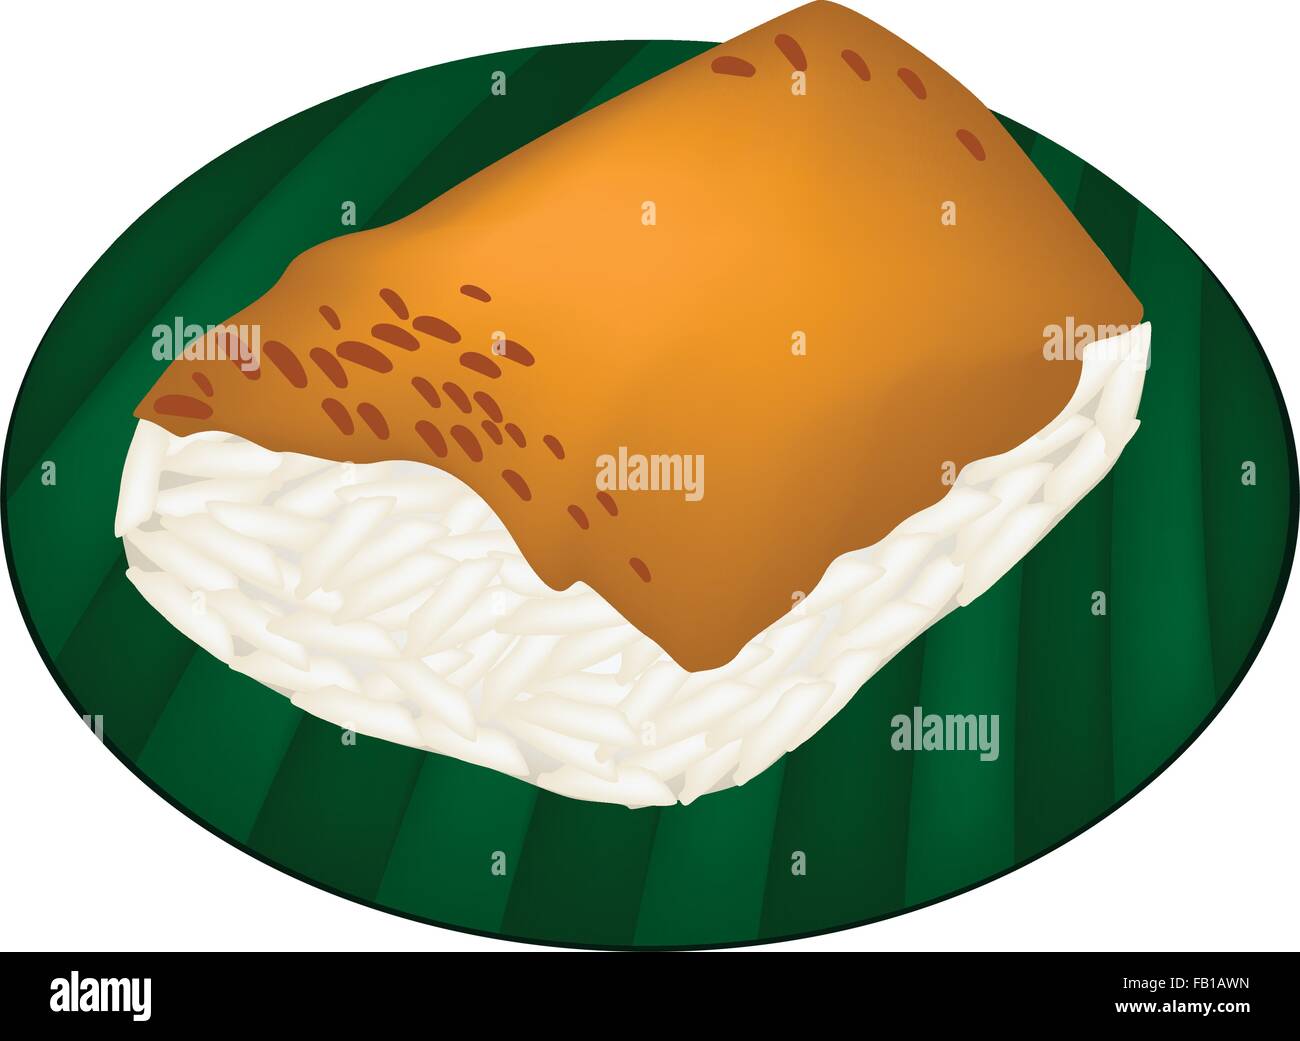 Thai Dessert, An Illustration of Sweet Sticky Rice Topped with Steamed Egg Custard on Green Banana Leaf. Stock Vector